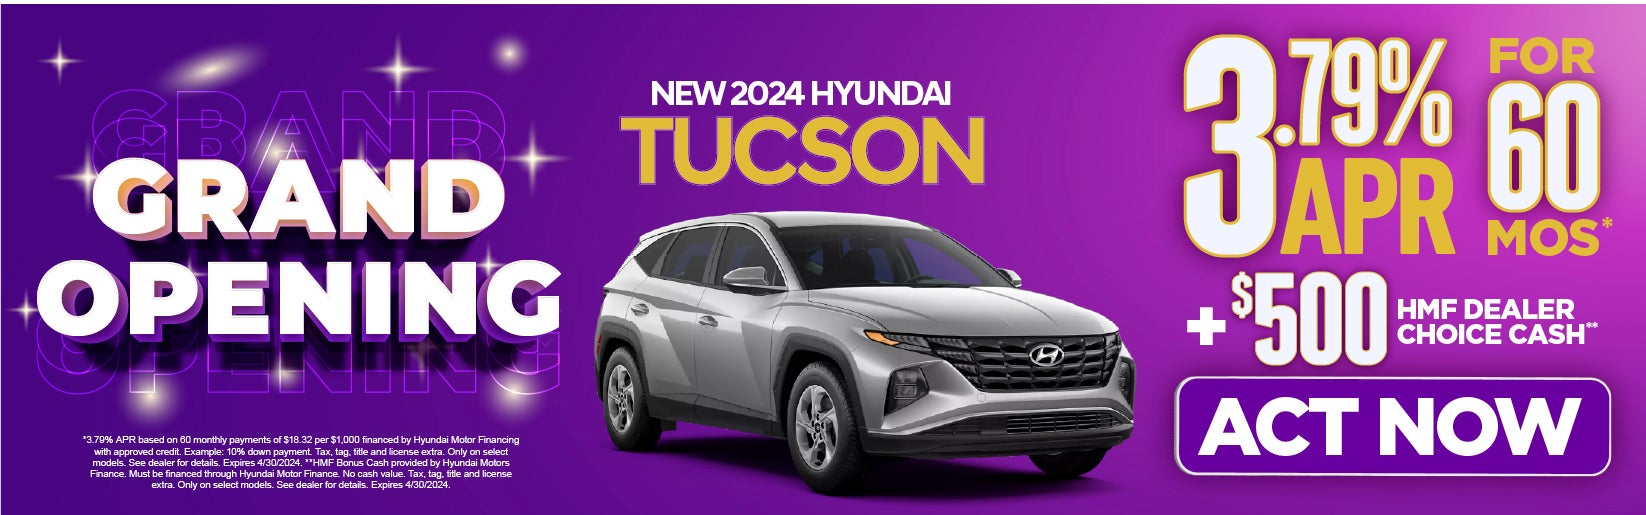 New 2024 Hyundai Tucson - 3.79% APR for 60 months. Act Now.